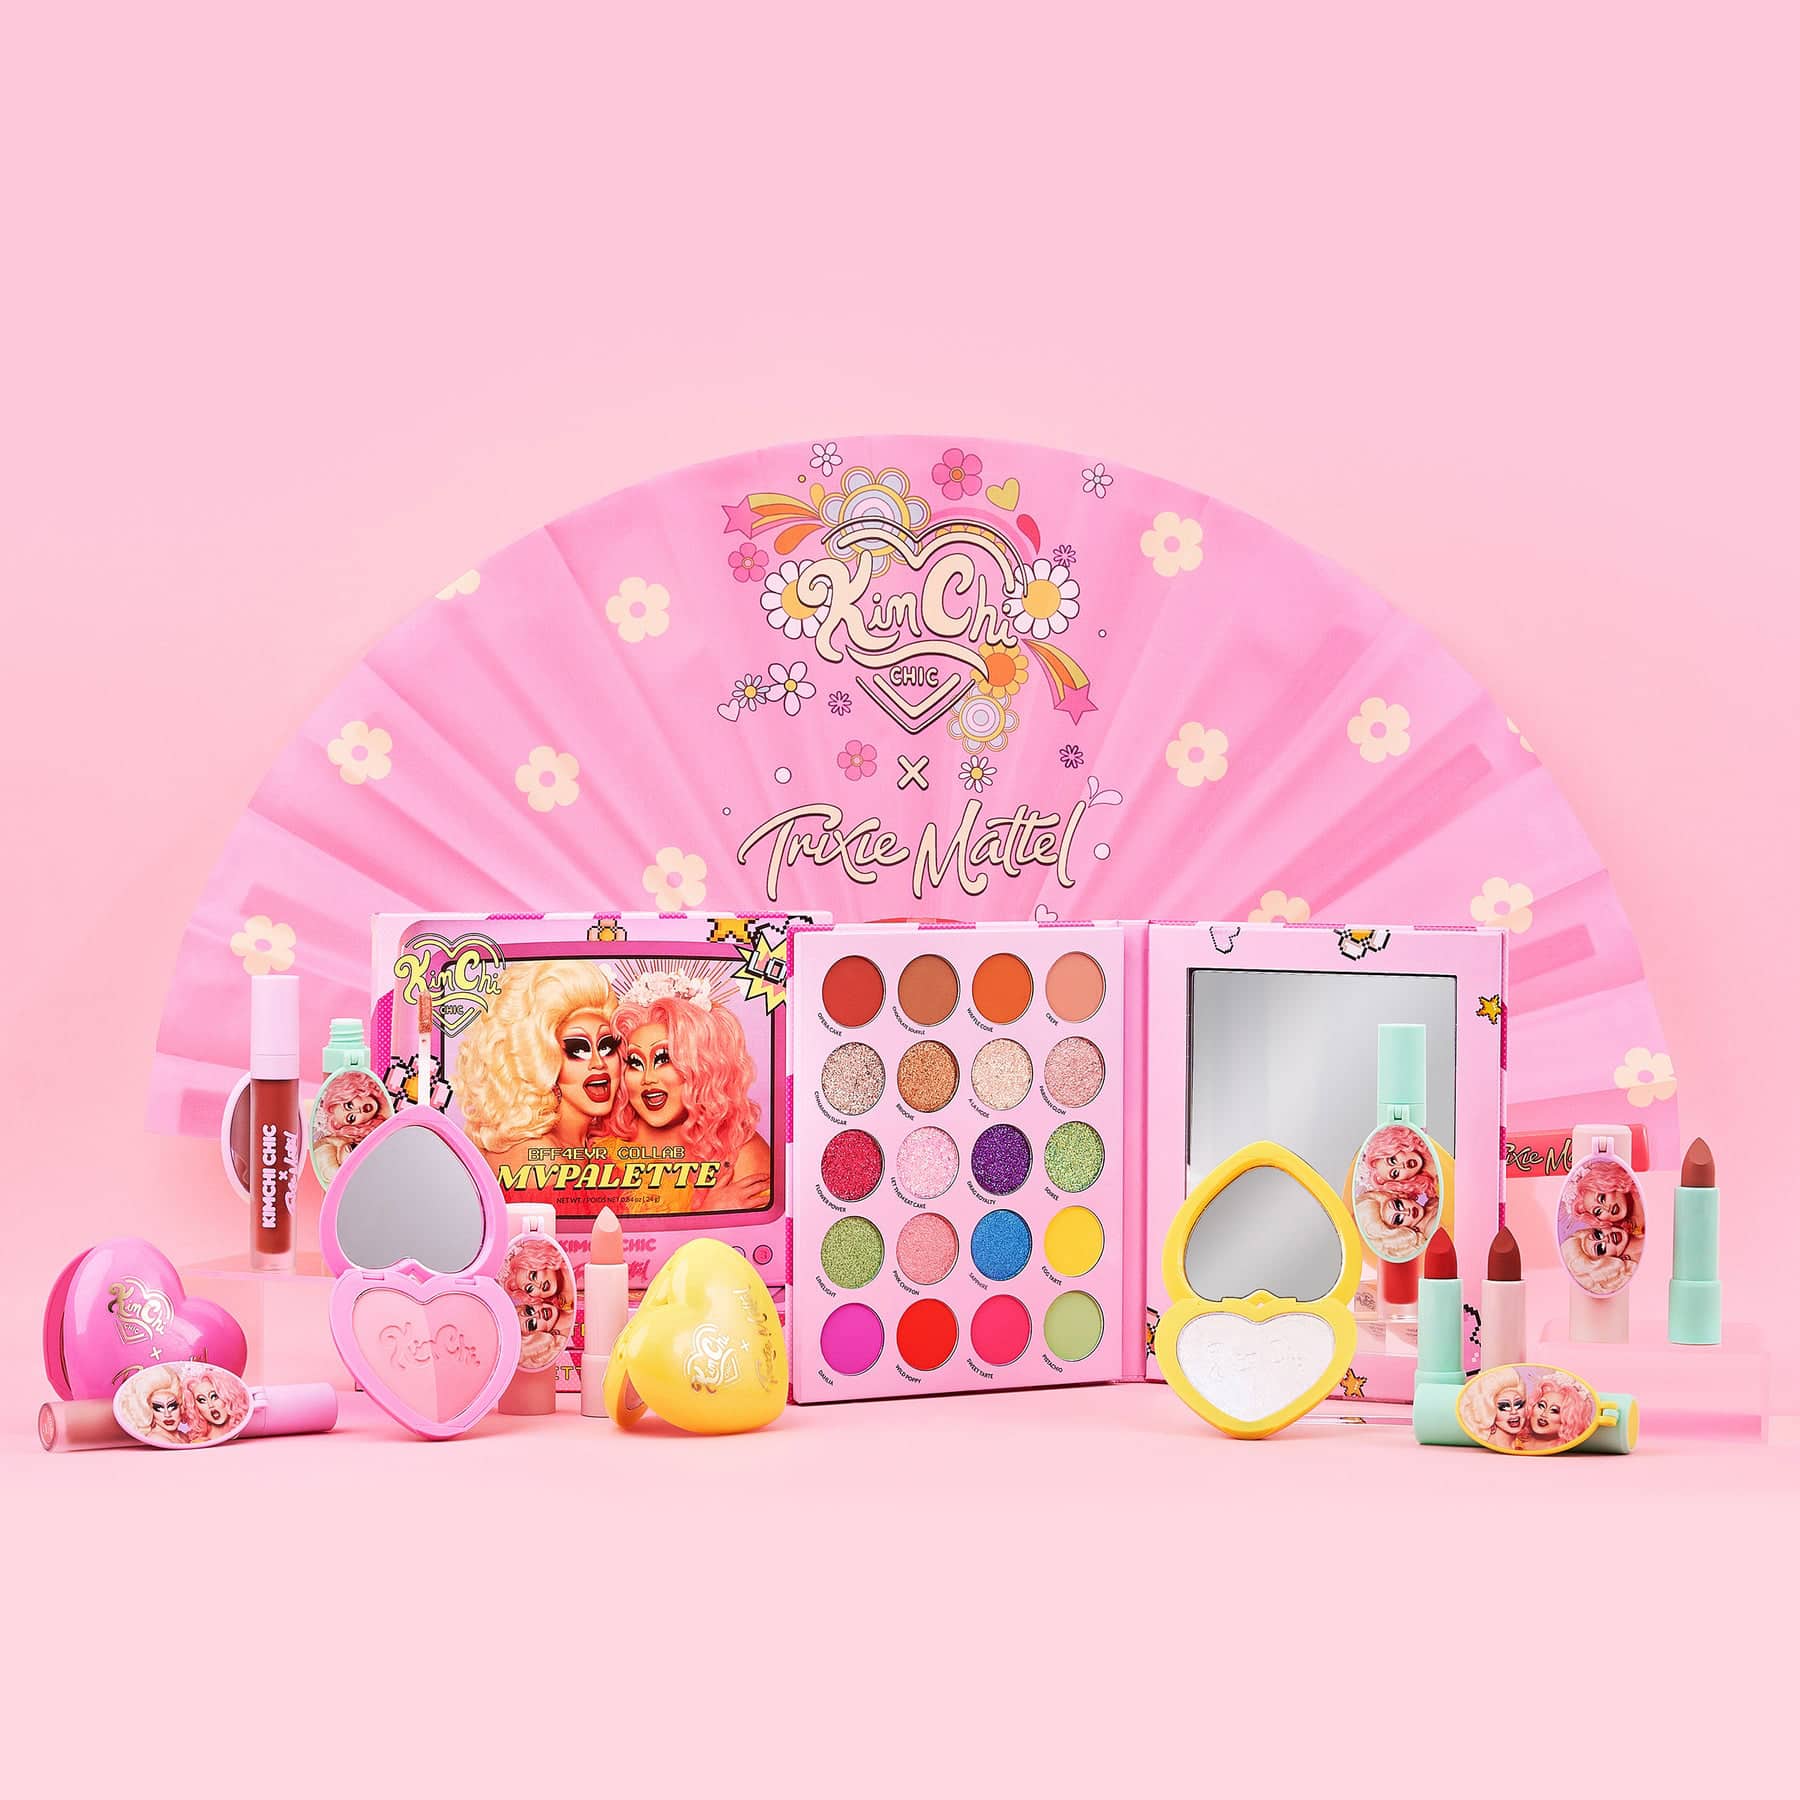 Kim Chi and Trixie Mattel have dropped a makeup collection collab.